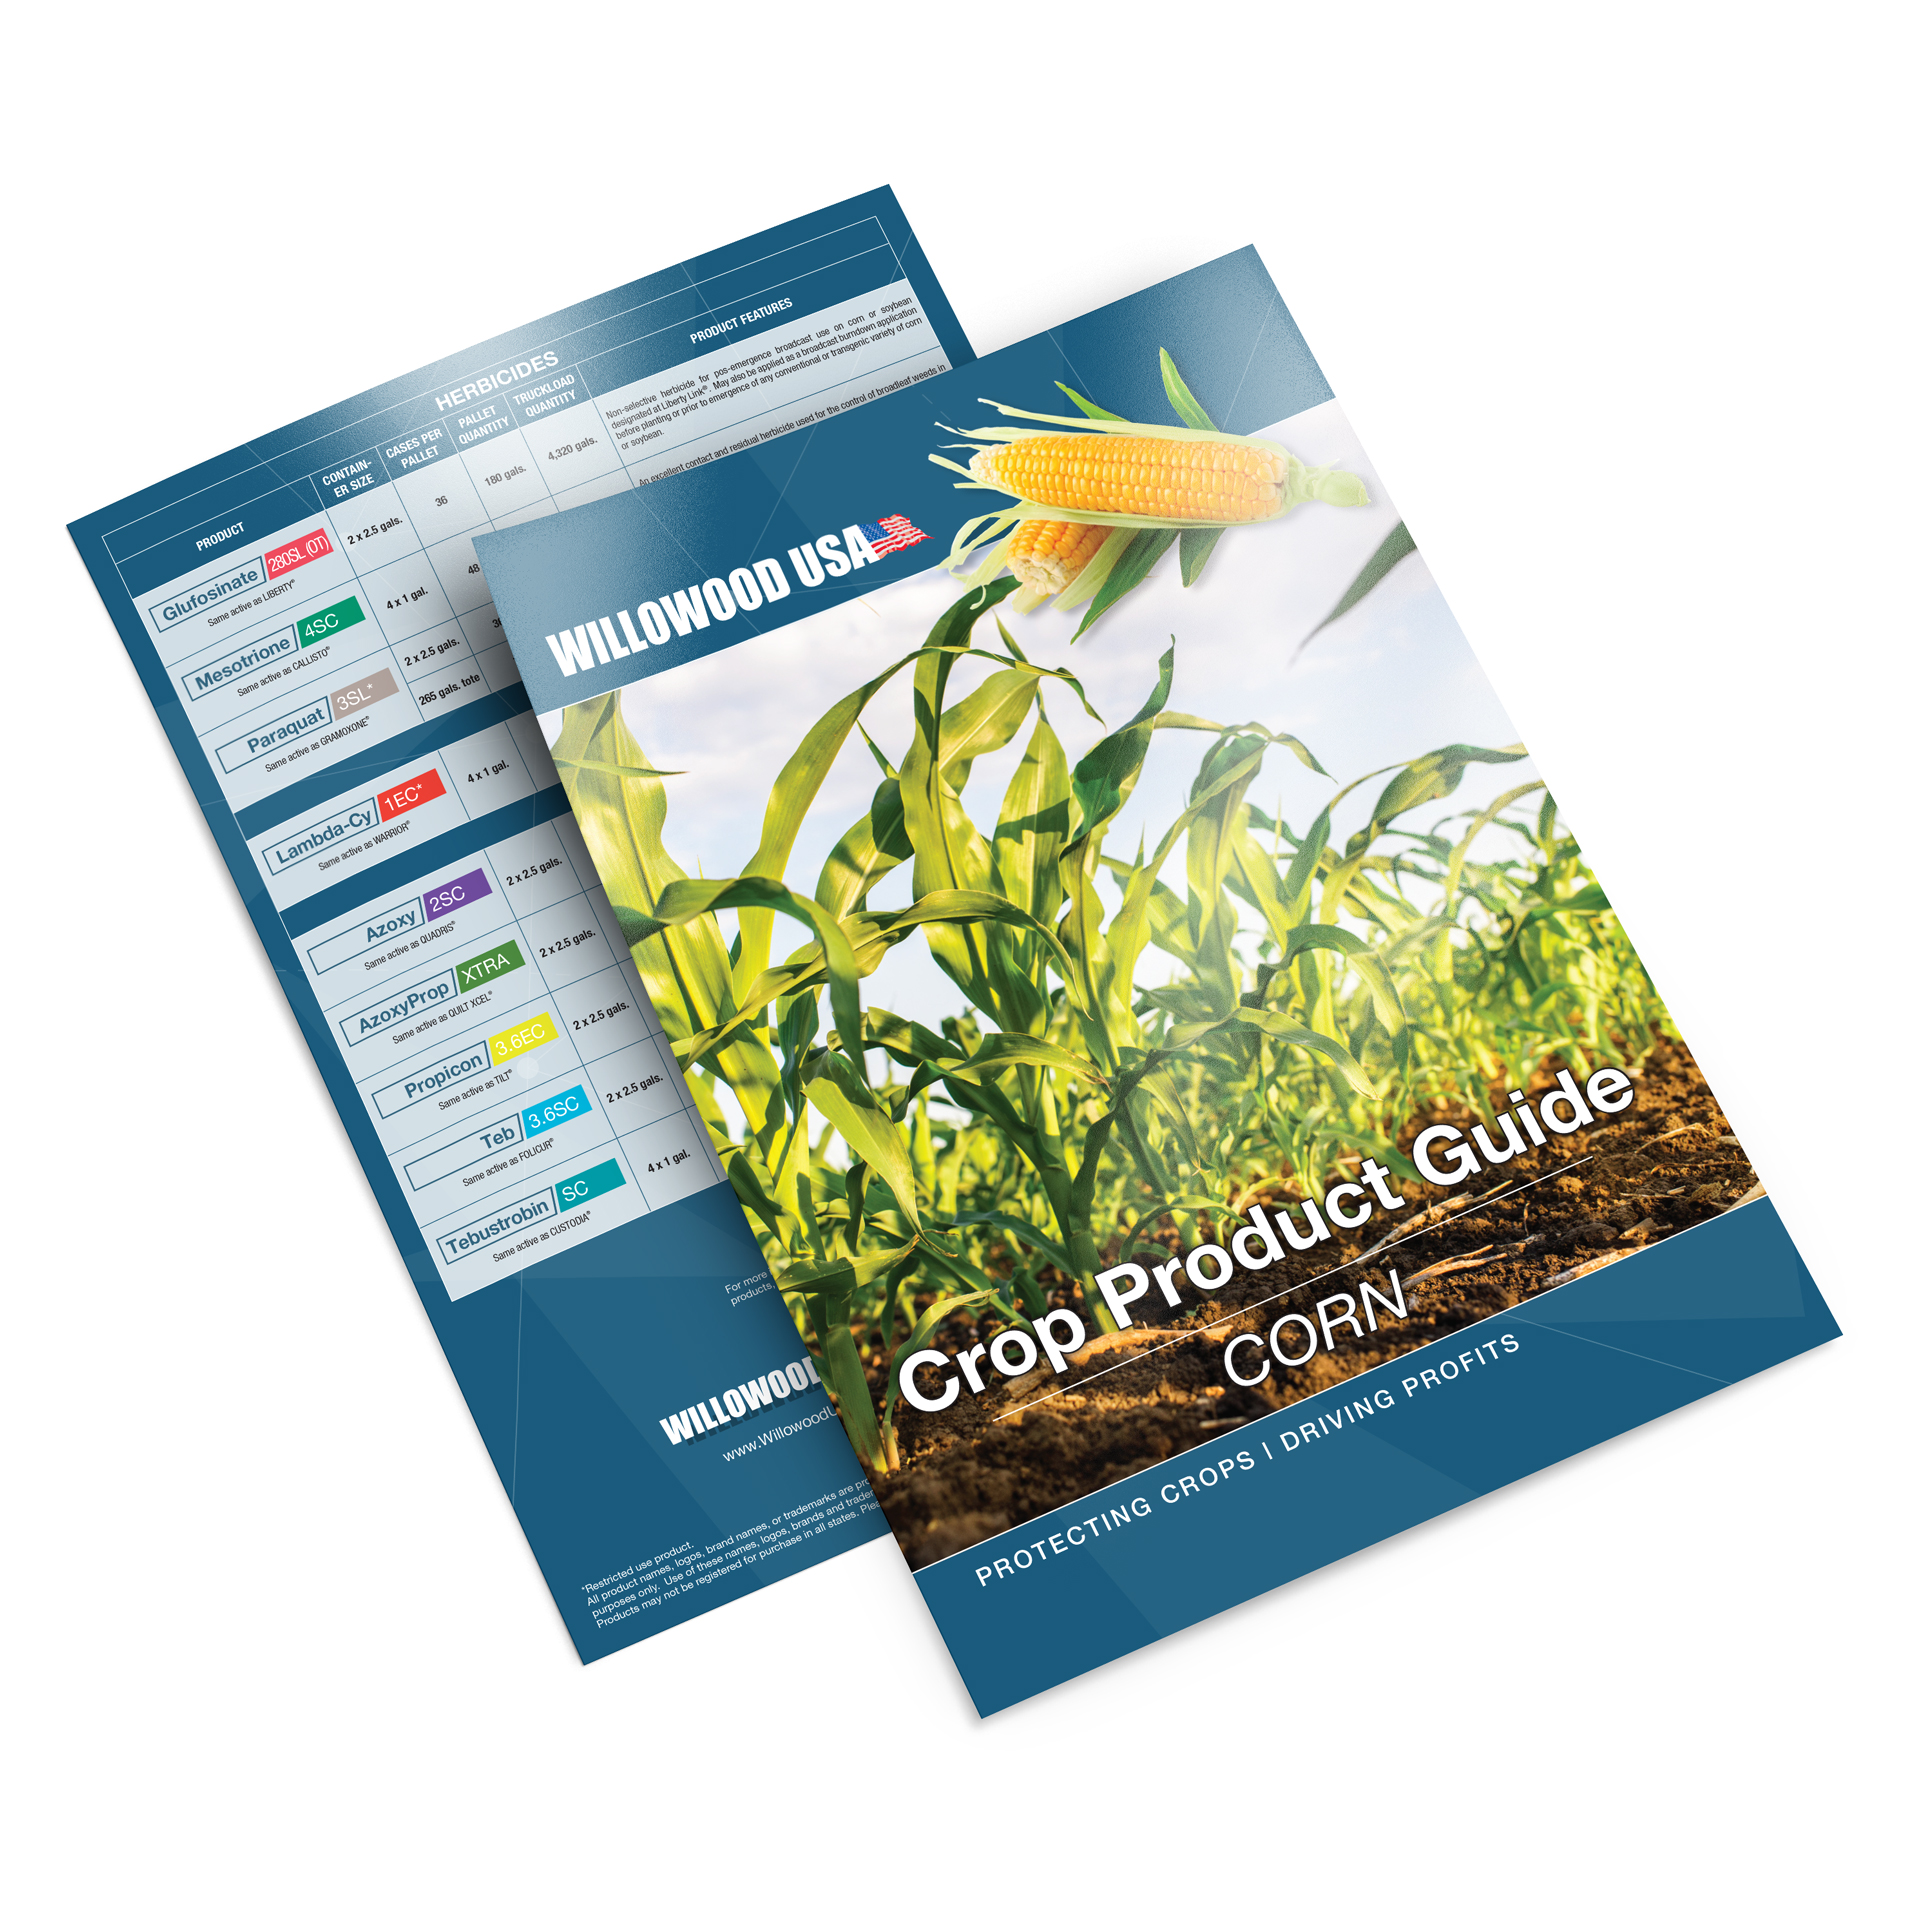 Willowood USA Crop Product Guide - Corn